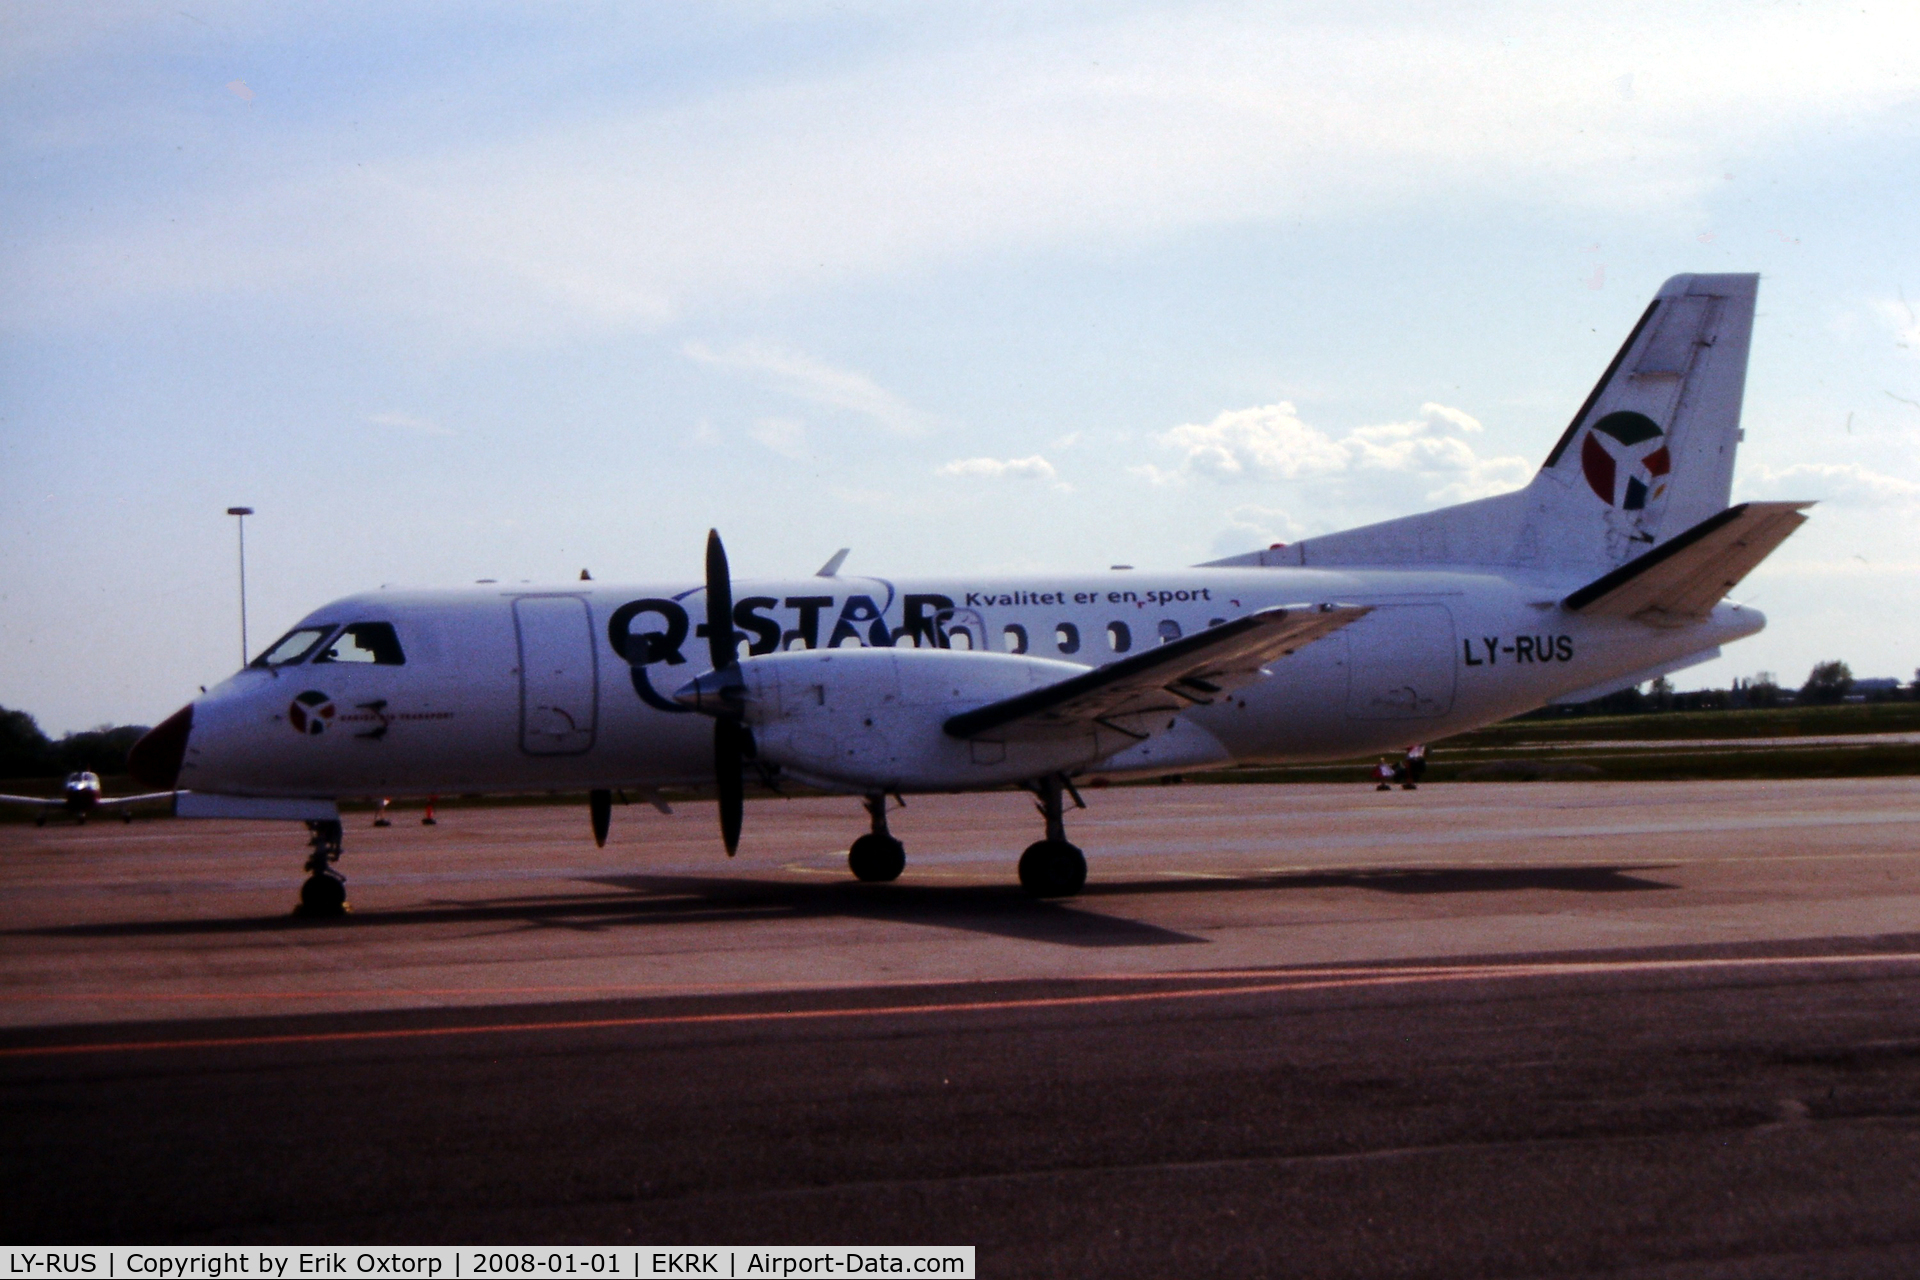 LY-RUS, 1985 Saab 340A C/N 340A-074, LY-RUS in RKE, MAY08